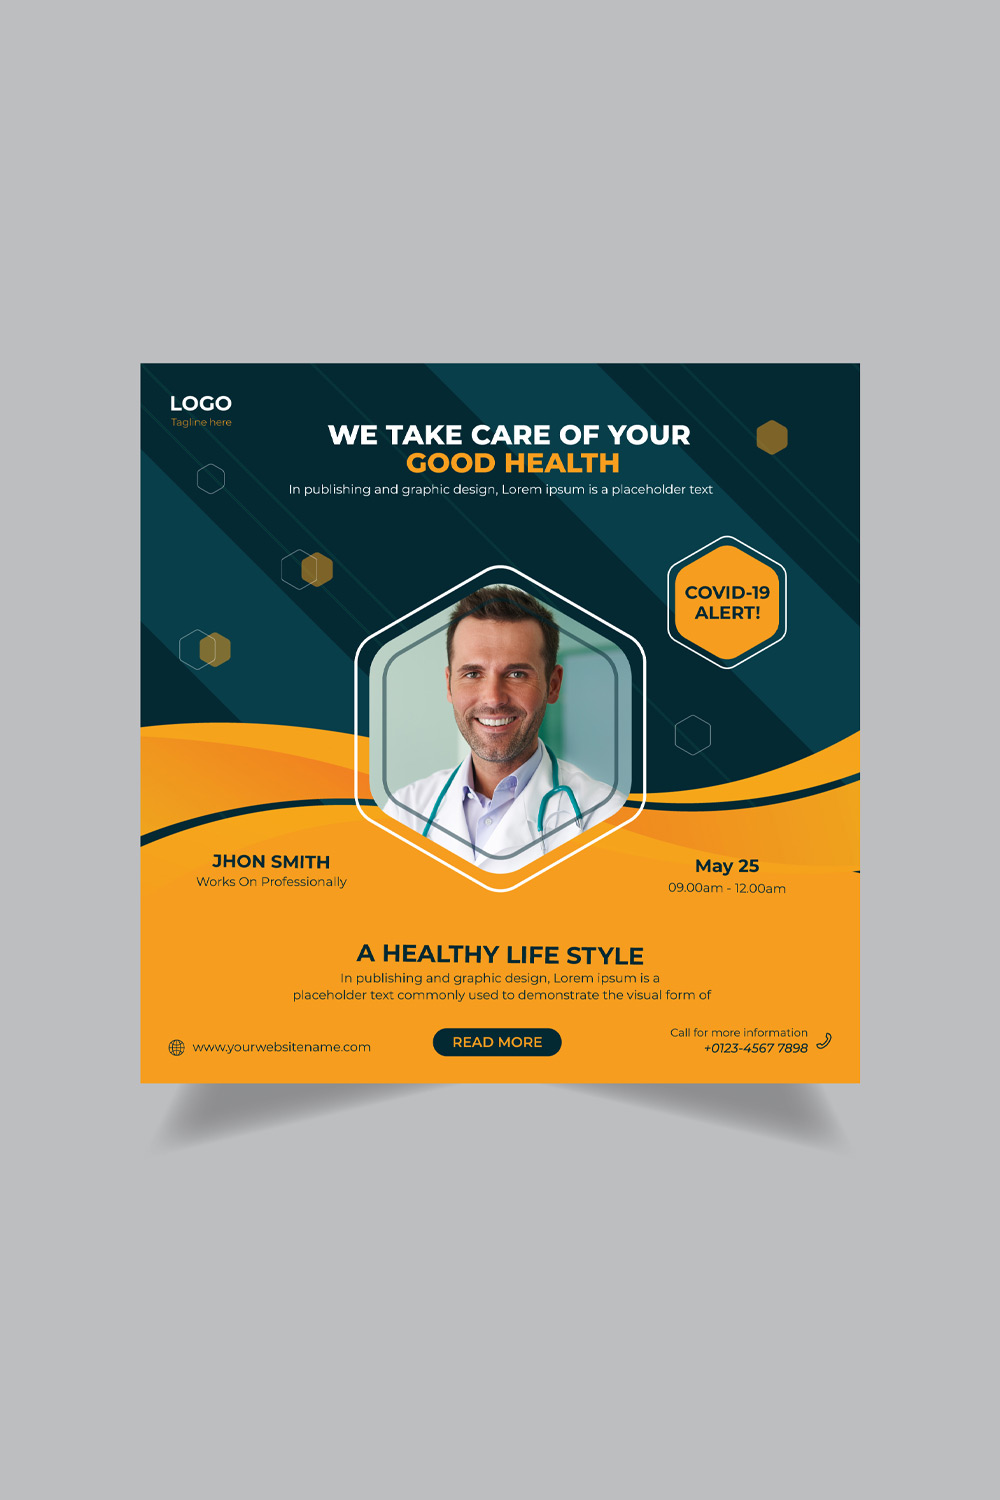 Medical health care flyer social media and horizontal web banner template only-$2 pinterest preview image.